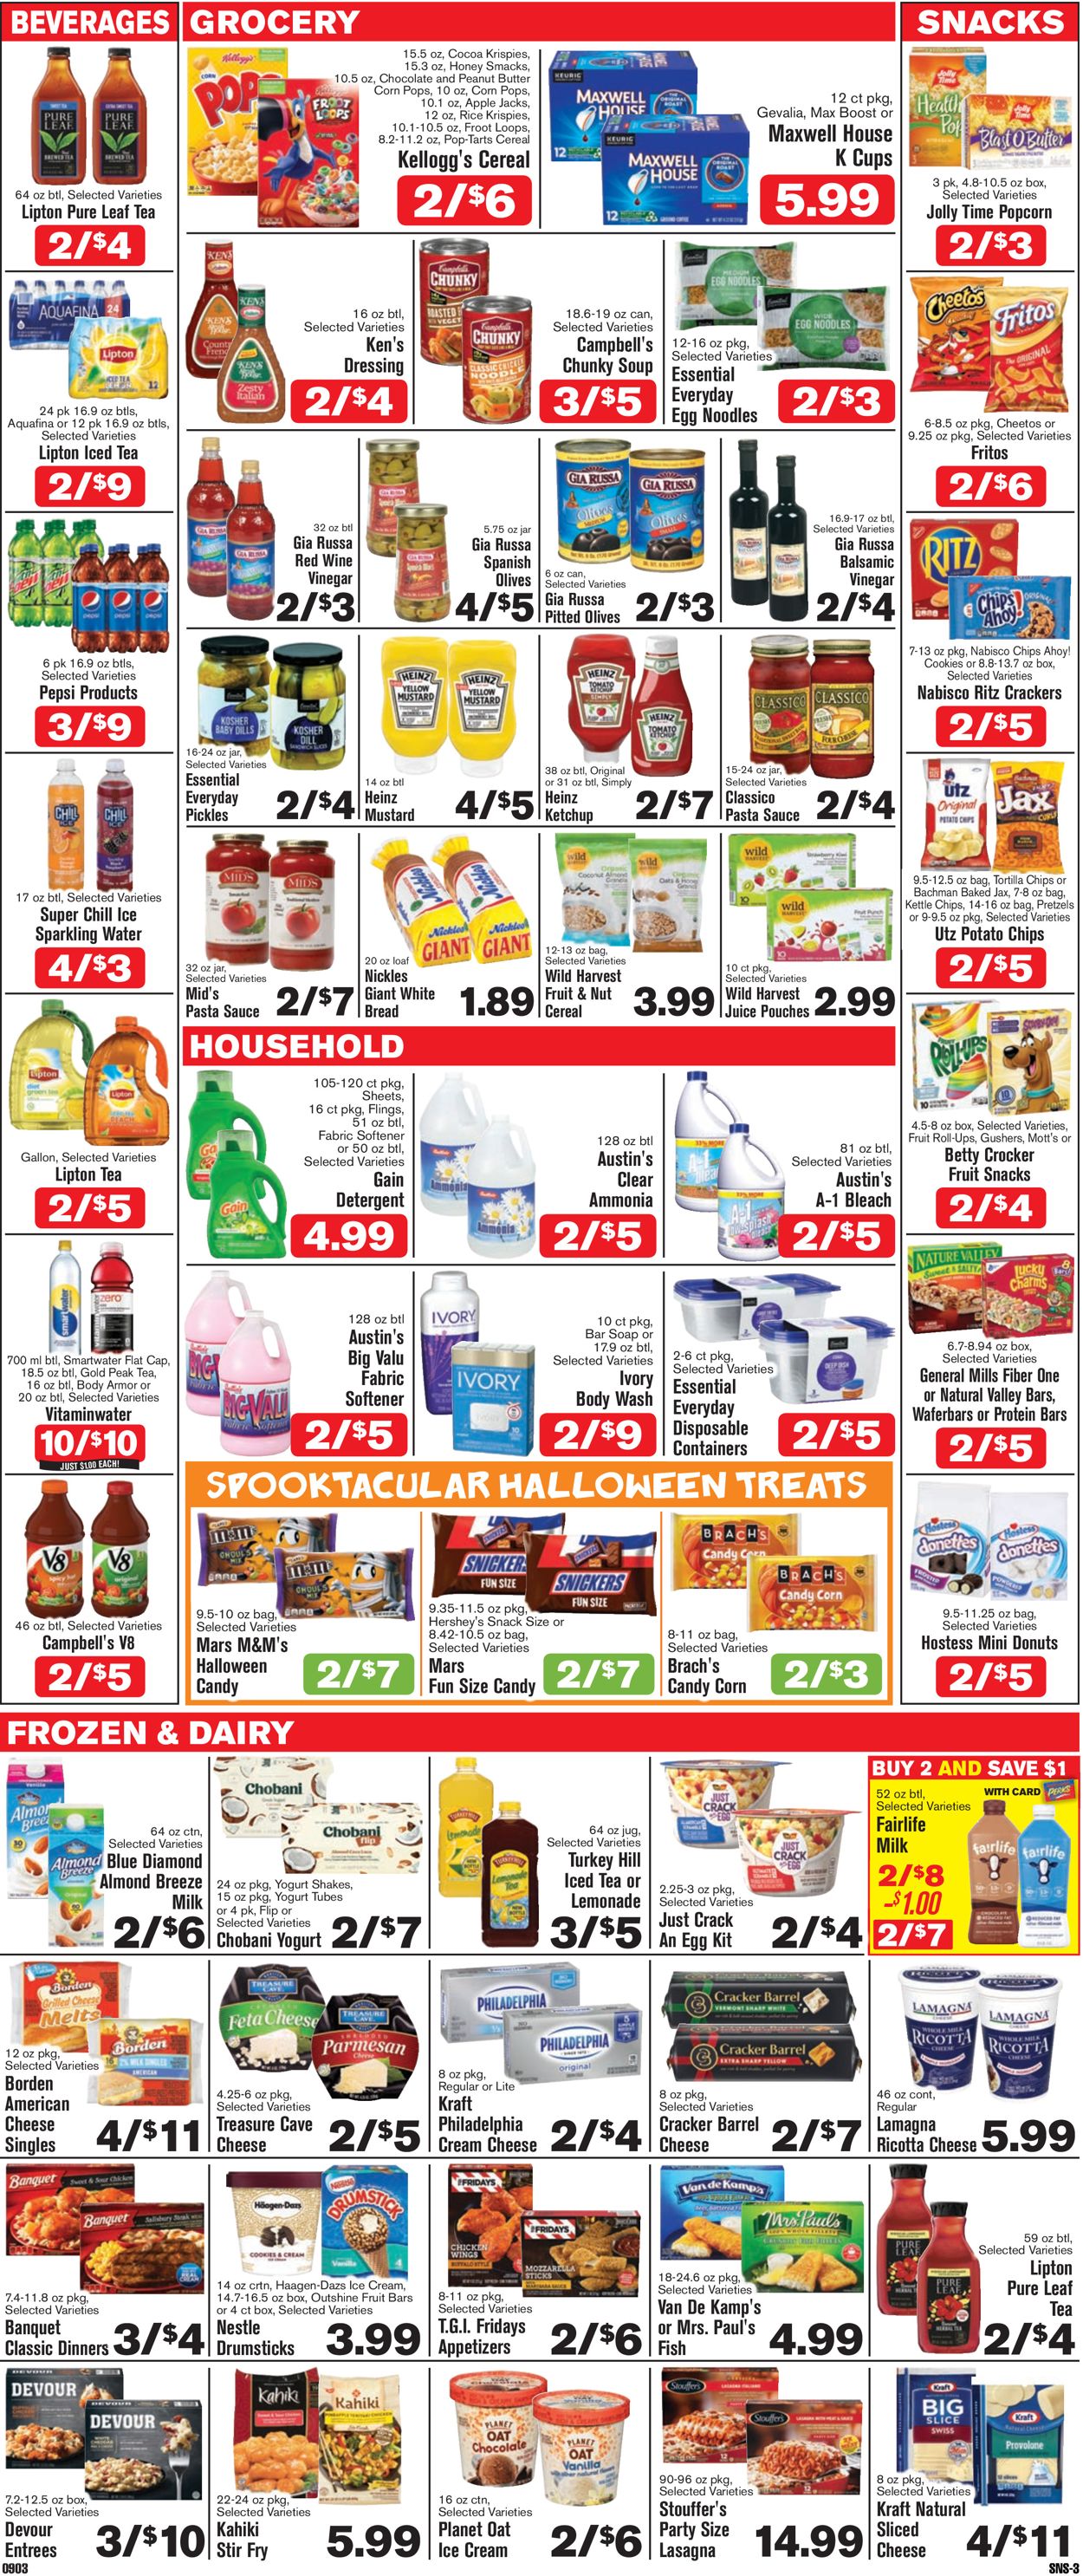 Catalogue Shop ‘n Save from 09/03/2020